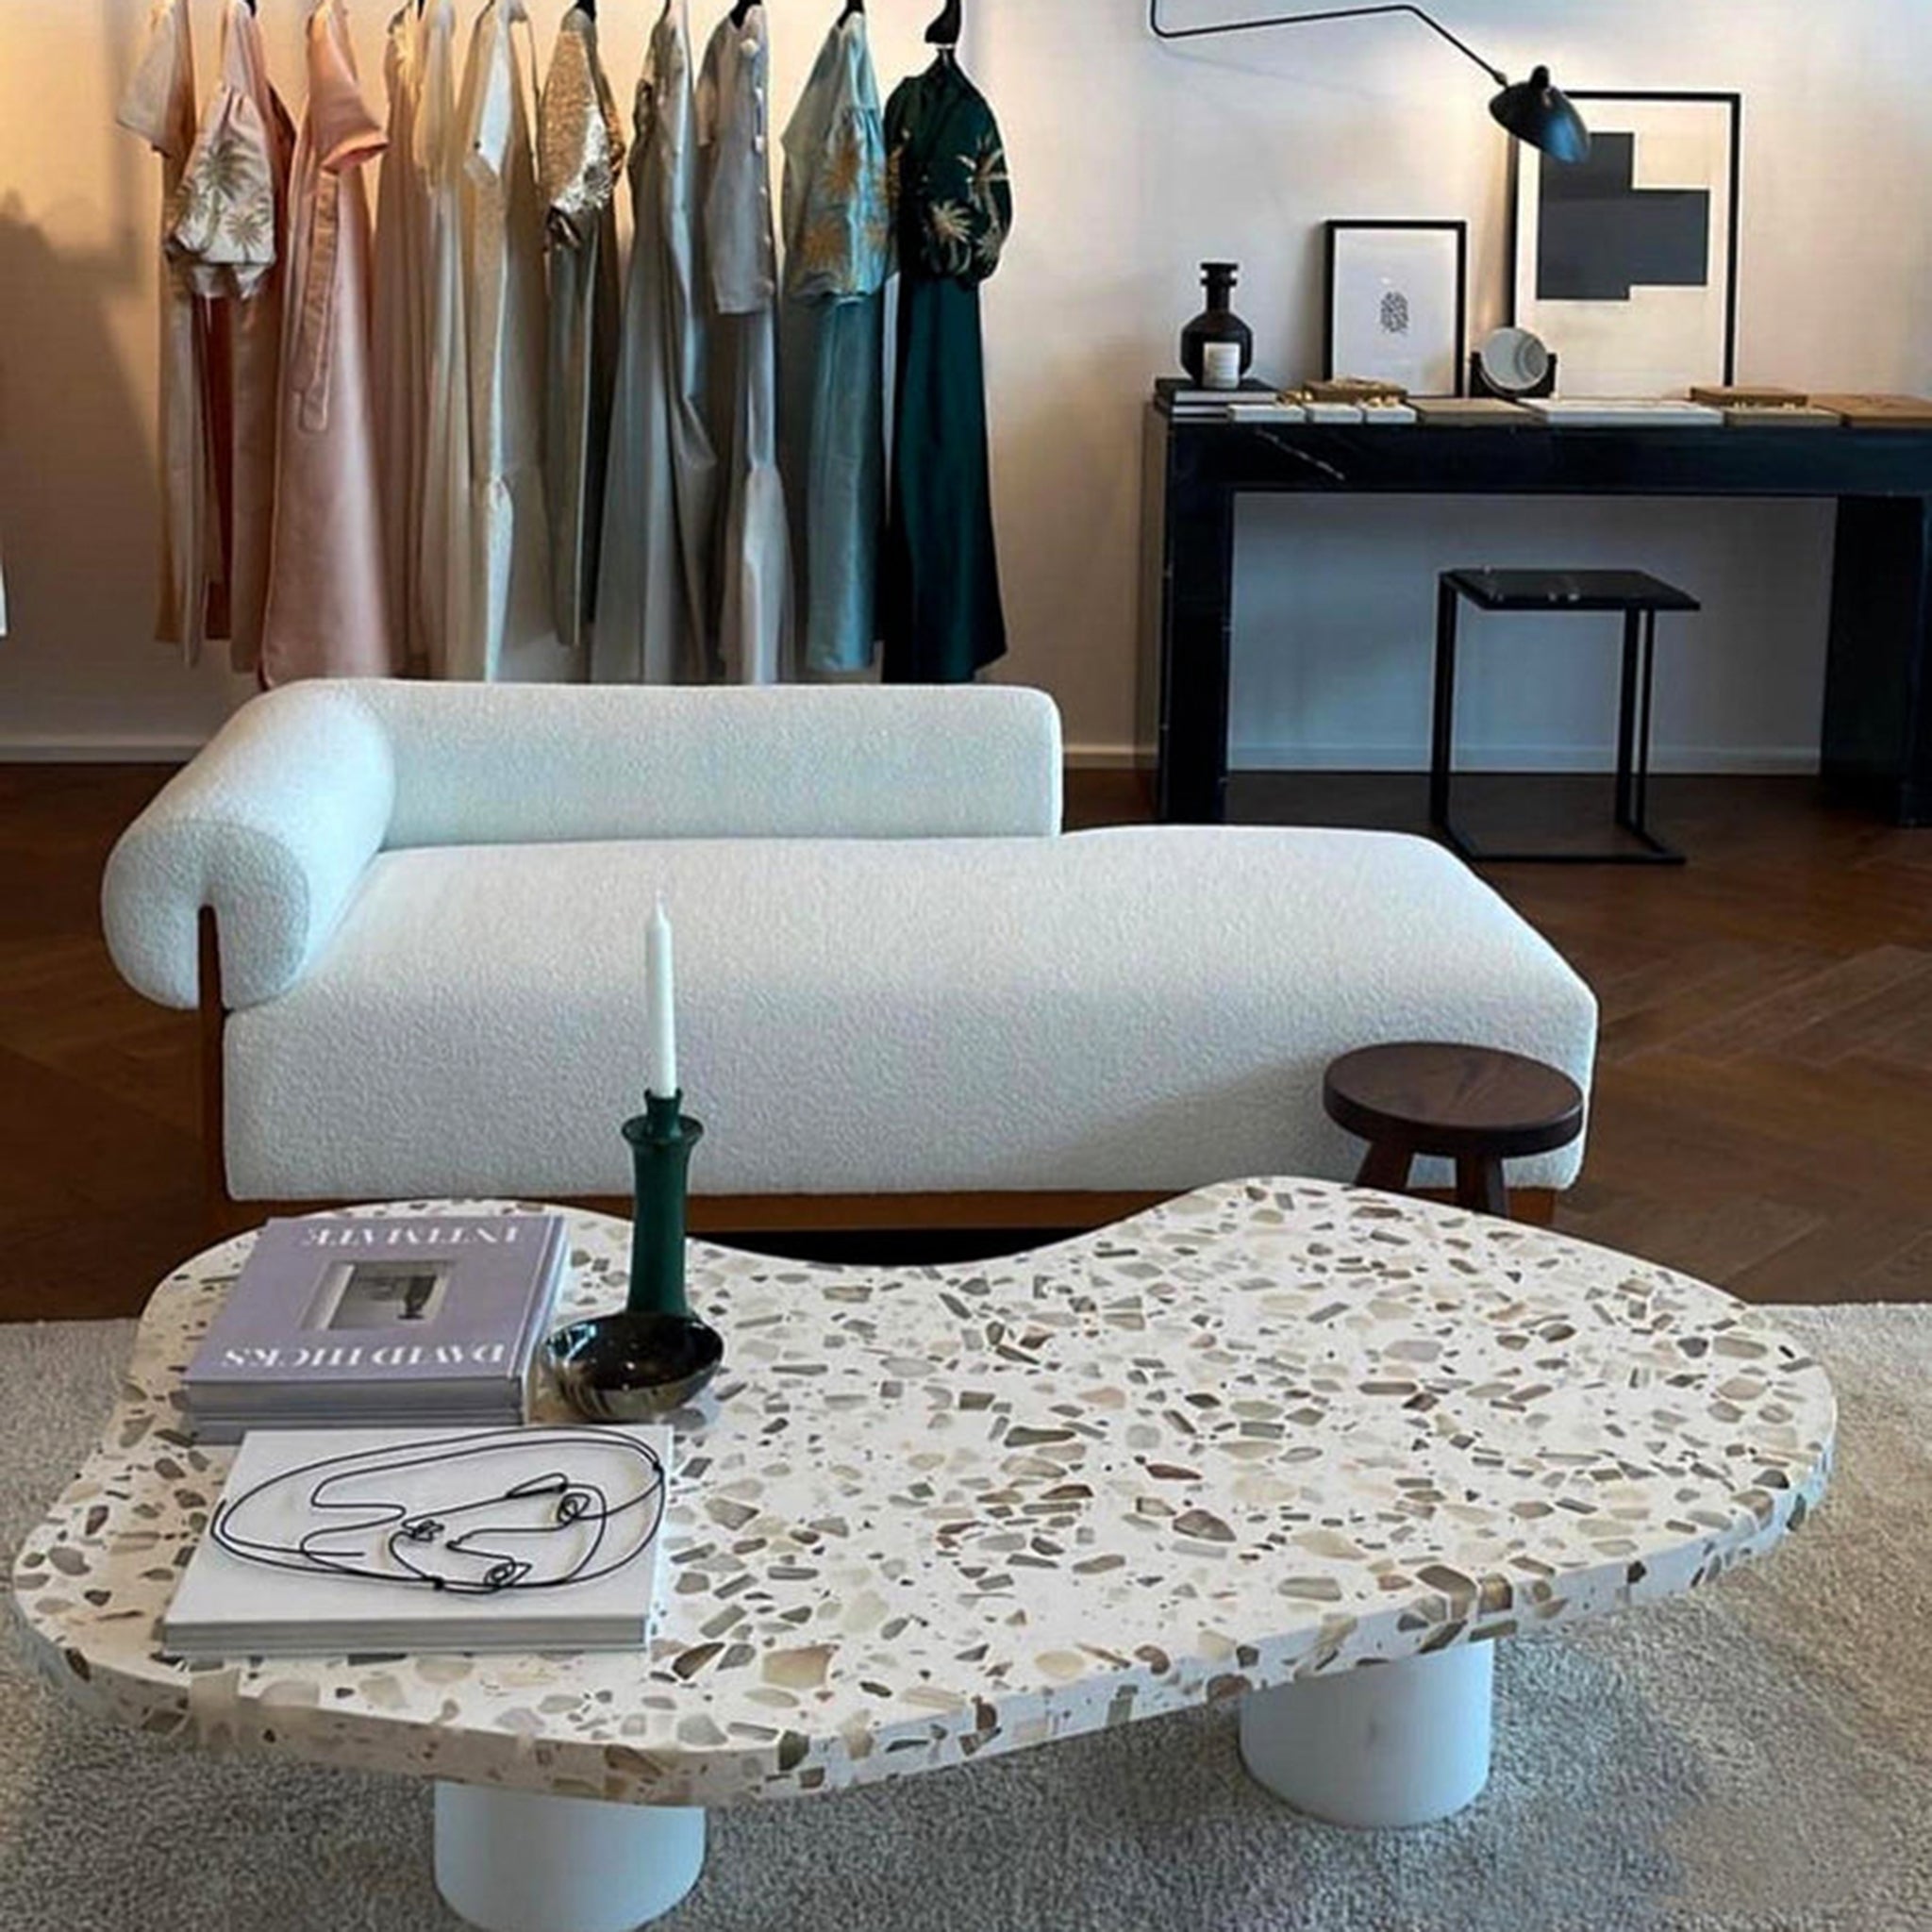 The Devon Chaise in a chic, modern interior with white upholstery and wooden frame, set near a unique terrazzo coffee table adorned with books and a candle, with a background of hanging clothes and a stylish black desk.